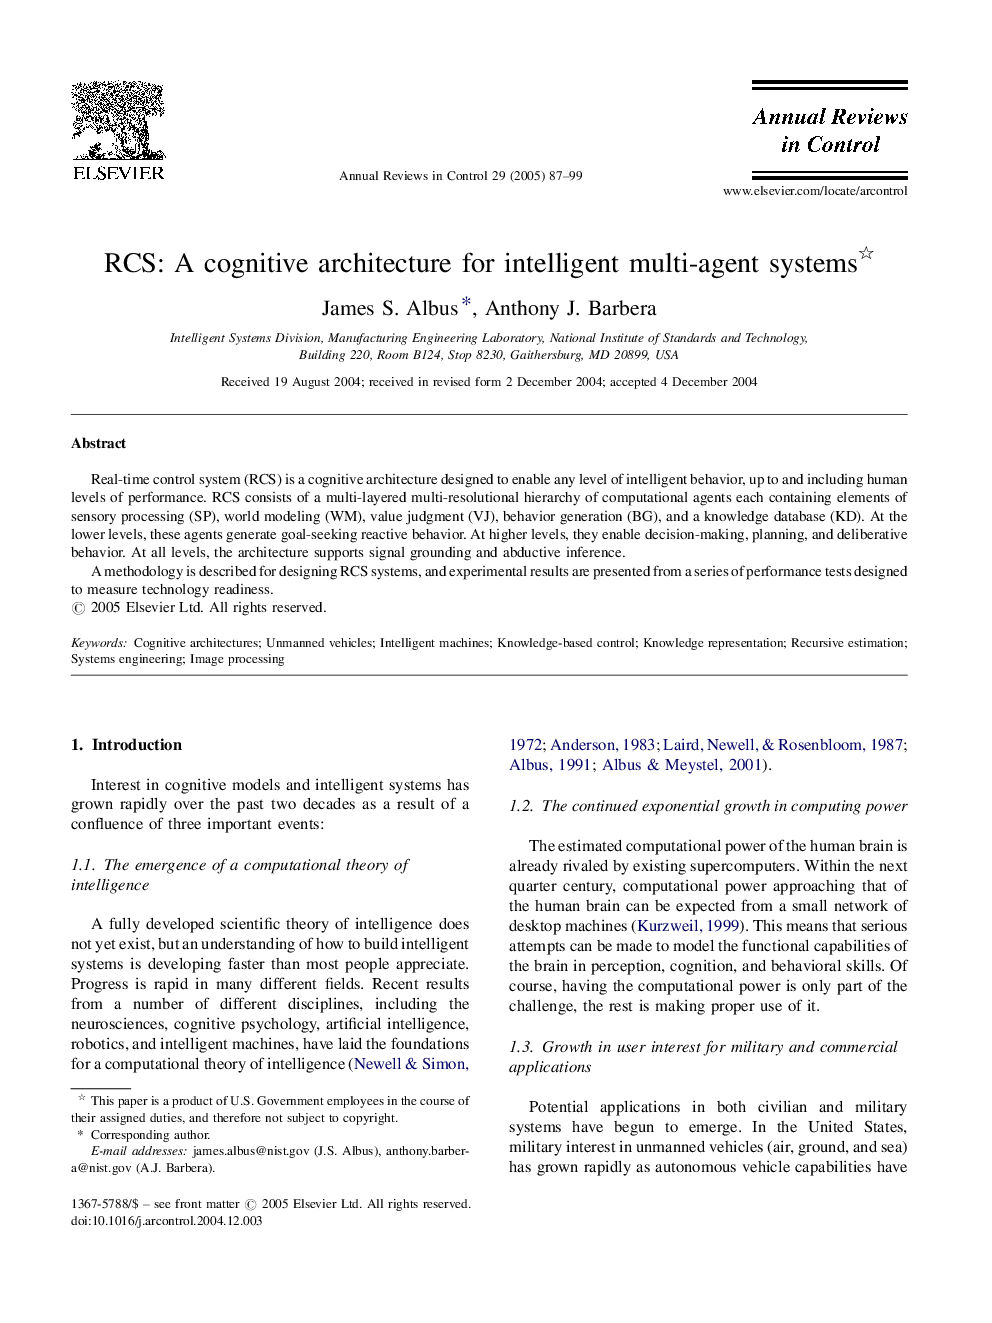 RCS: A cognitive architecture for intelligent multi-agent systems